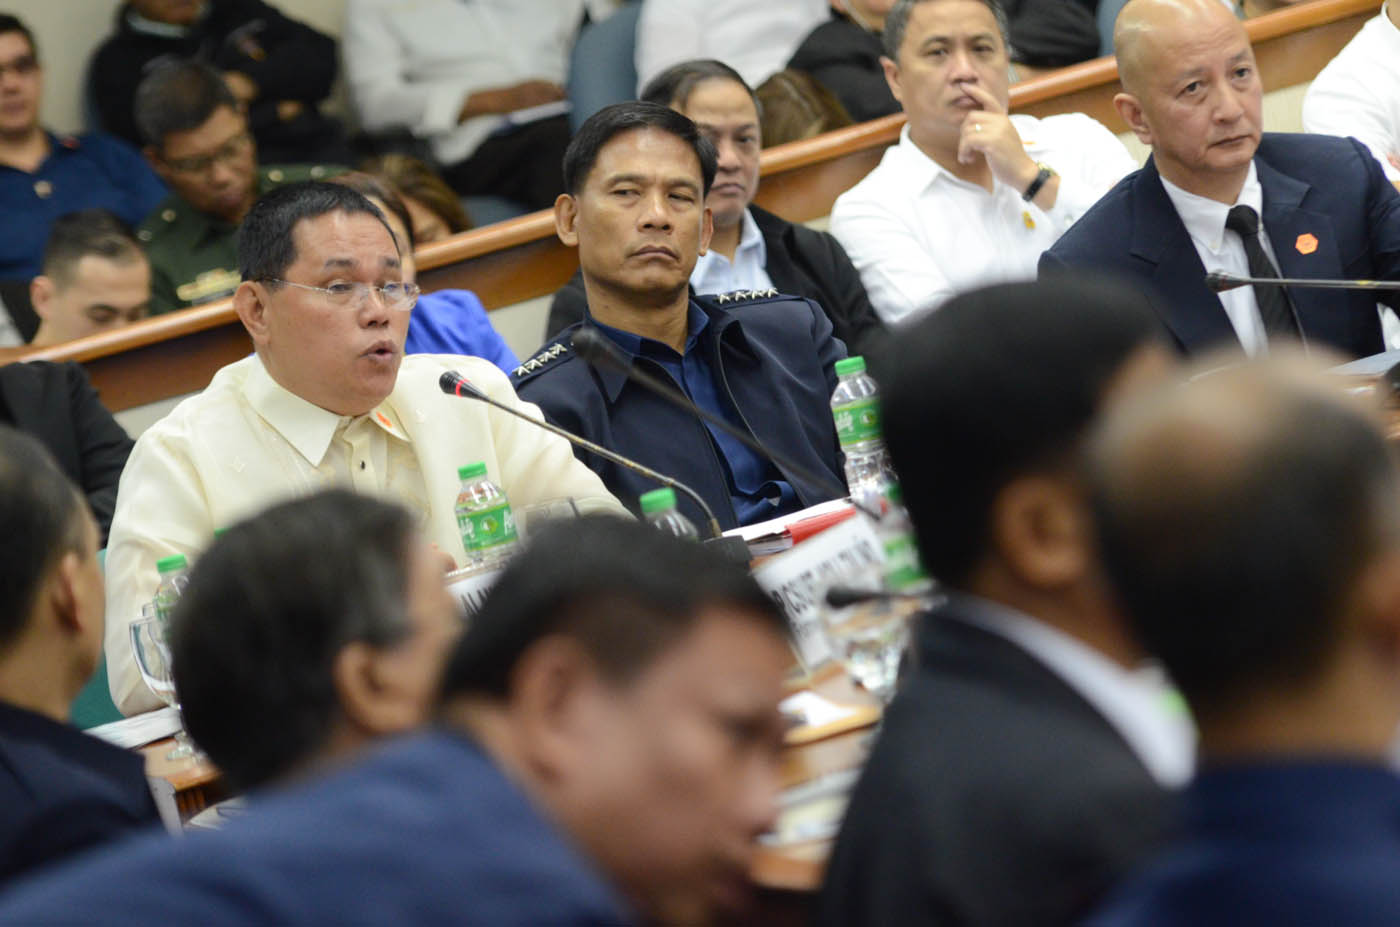 REOPENED PROBE. Former PNP chief Alan Purisima responds to questions at the Senate's January 27, 2016 probe into the Mamasapano clash. Photo by Alecs Ongcal/Rappler  